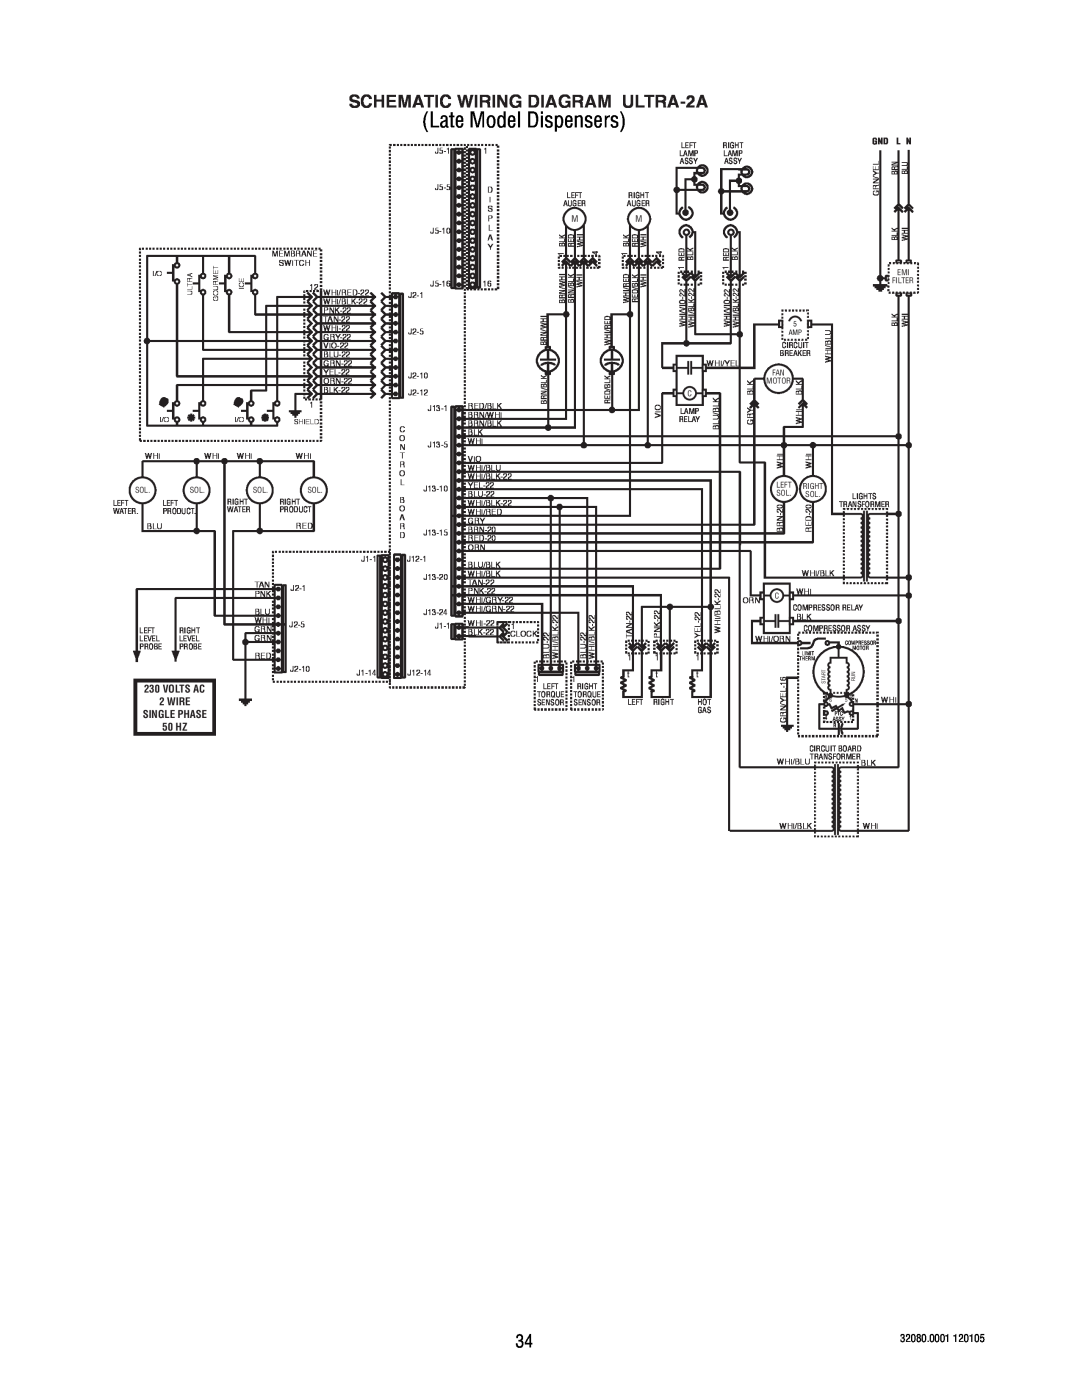 Bunn manual SCHEMATIC WIRING DIAGRAM ULTRA-2A, 50 HZ, Volts Ac, Wire, Single Phase 